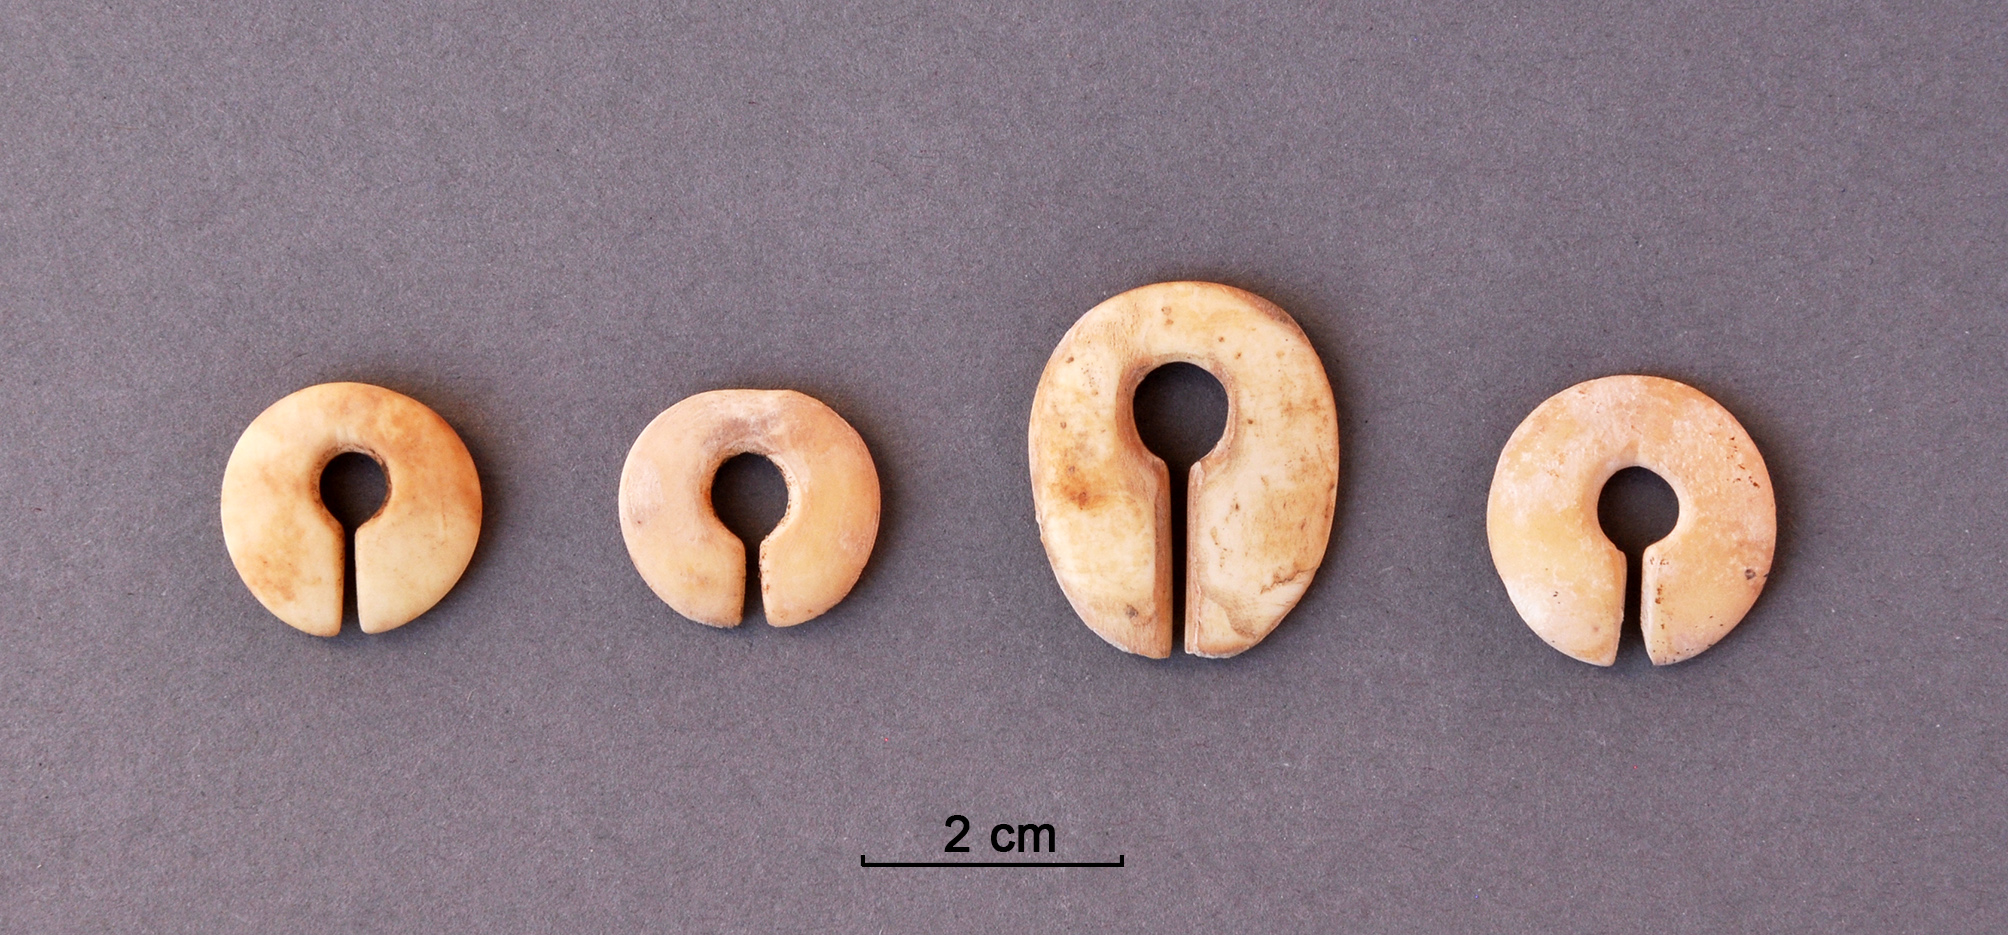 Shell earrings from male graves (Kerma ancien II, Sector 23). Their diameter is between 2 and 3 cm.